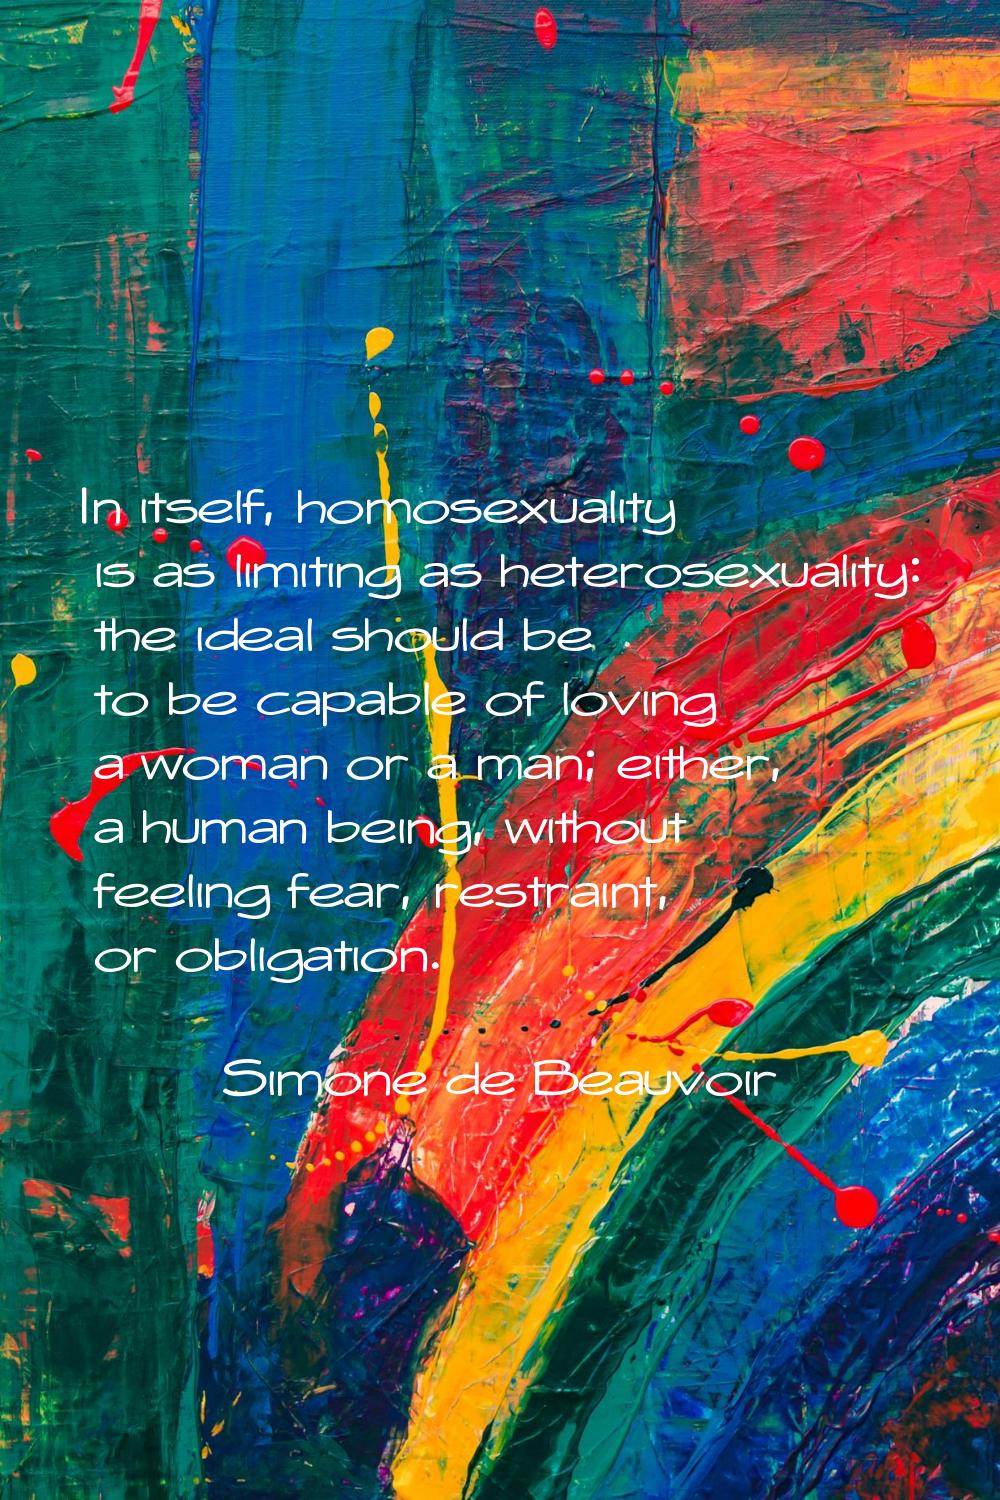 In itself, homosexuality is as limiting as heterosexuality: the ideal should be to be capable of lo